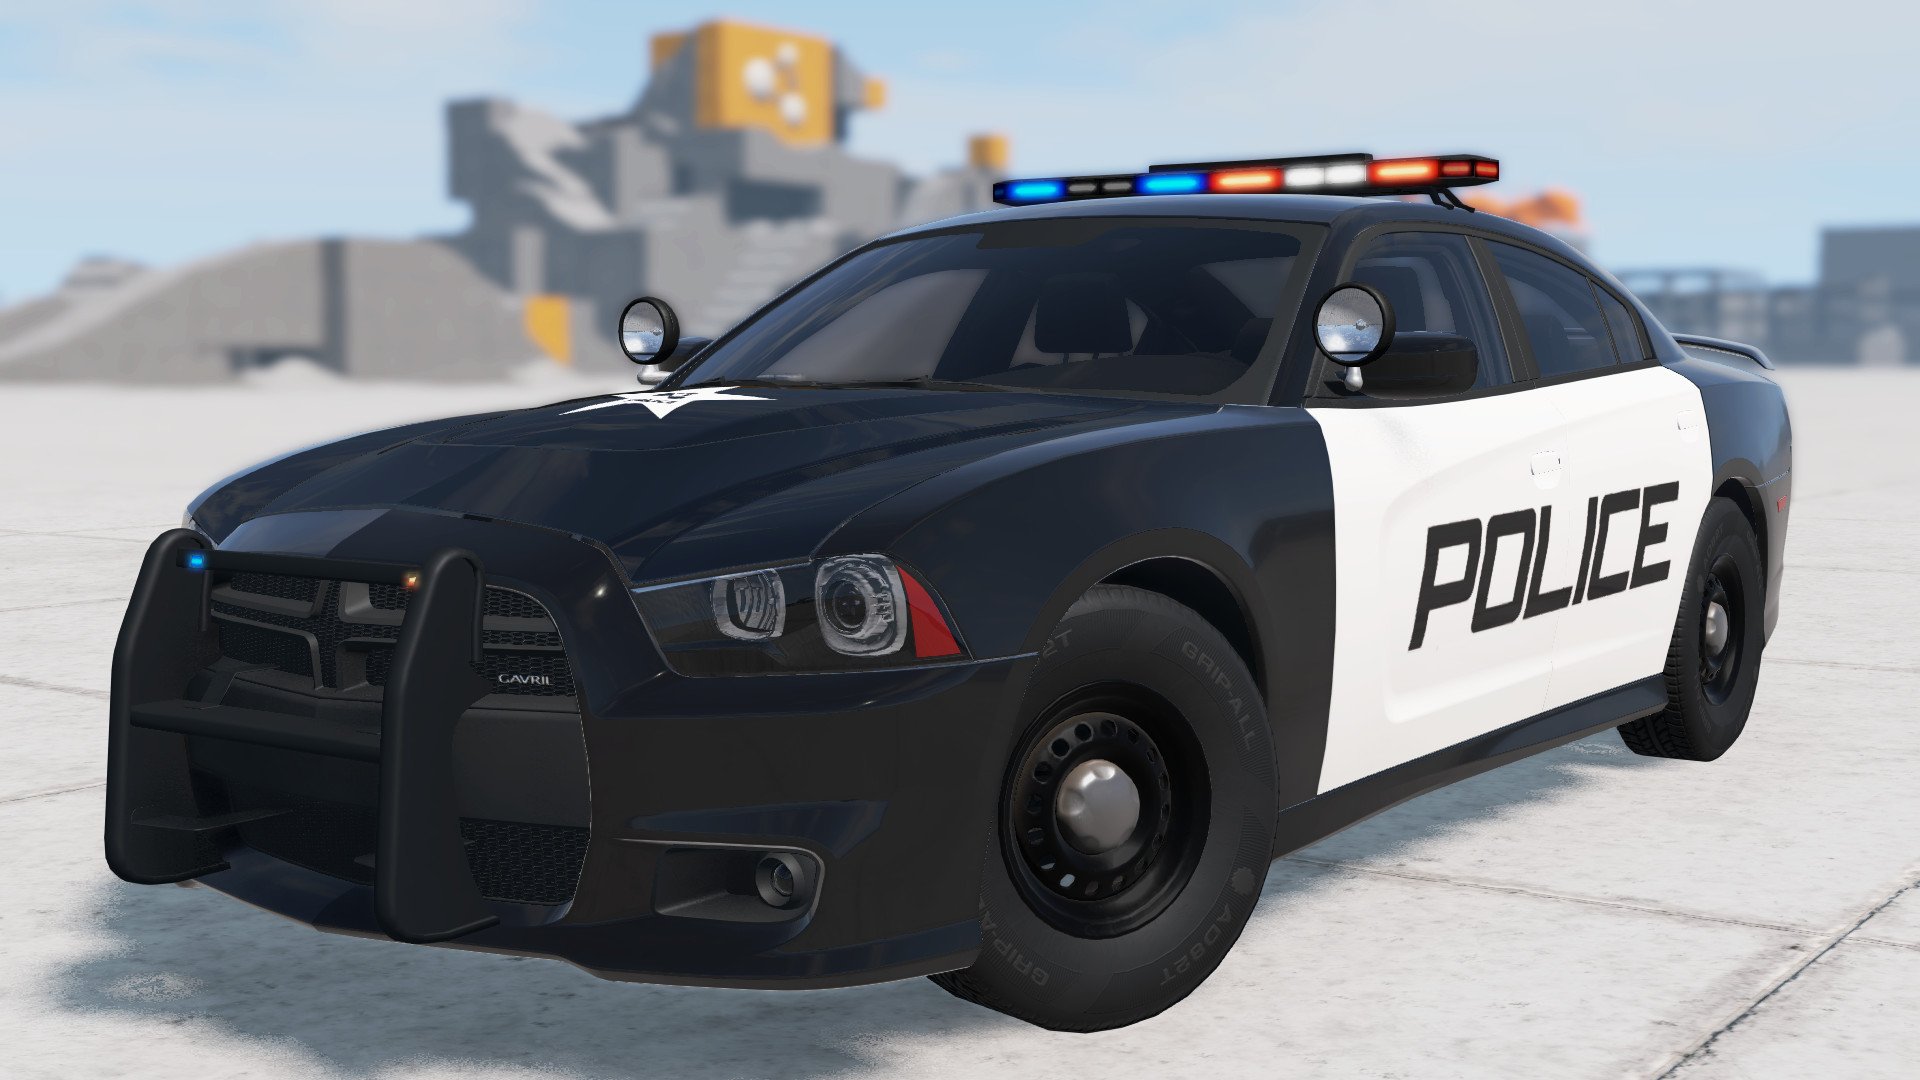 2012 Dodge Charger (Gavril Grand Marshal) Revamped 1.0.2 - BeamNG.drive